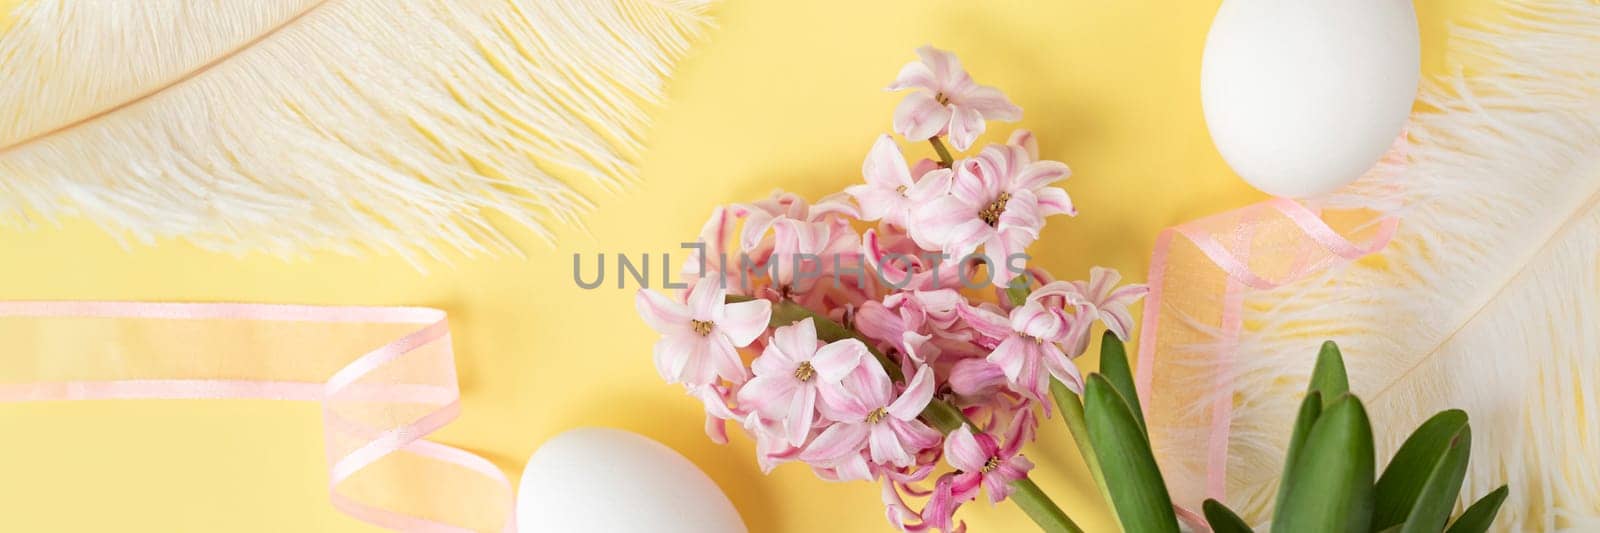 banner of hyacinth flowers with two white eggs, and white feathers, and pink ribbon on pastel yellow colors. Happy Easter concept. Easter background. Top view